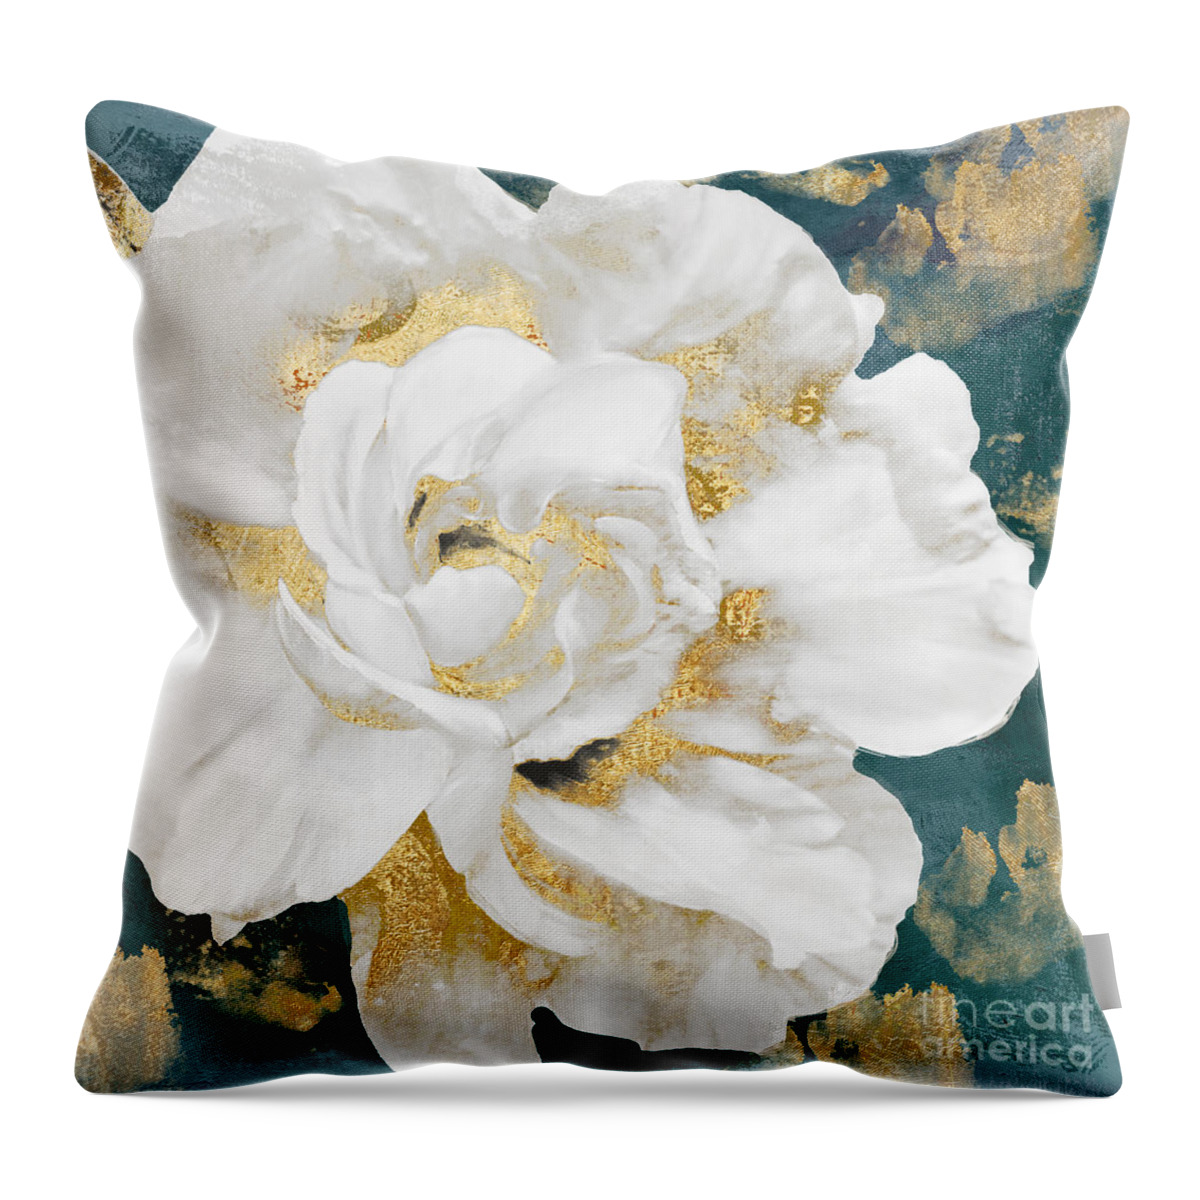 Petals Throw Pillow featuring the painting Petals Impasto White and Gold by Mindy Sommers